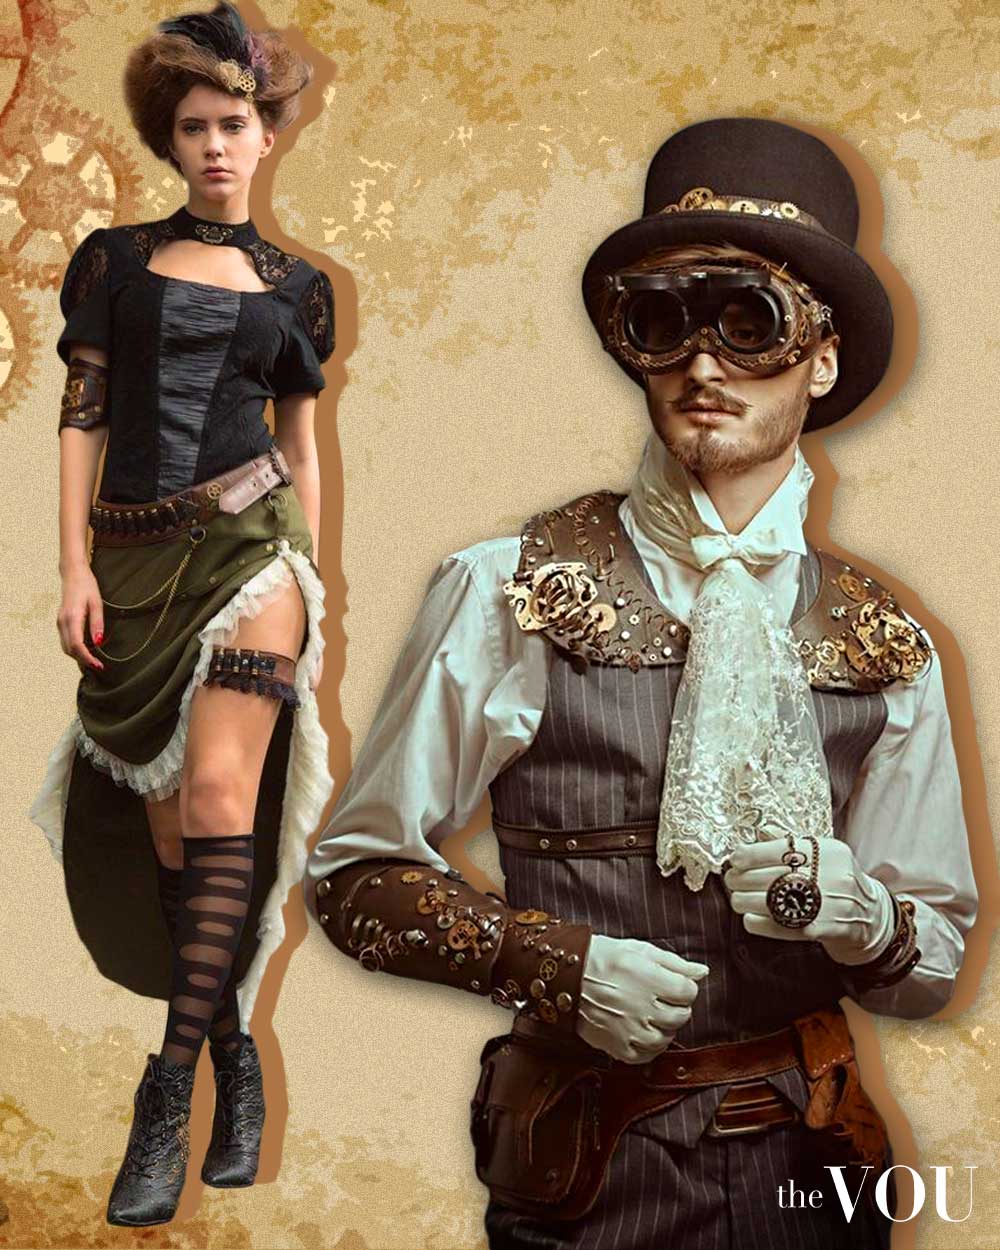 Steampunk Fashion: Origin, Key Stylistic Features, and How to Dress